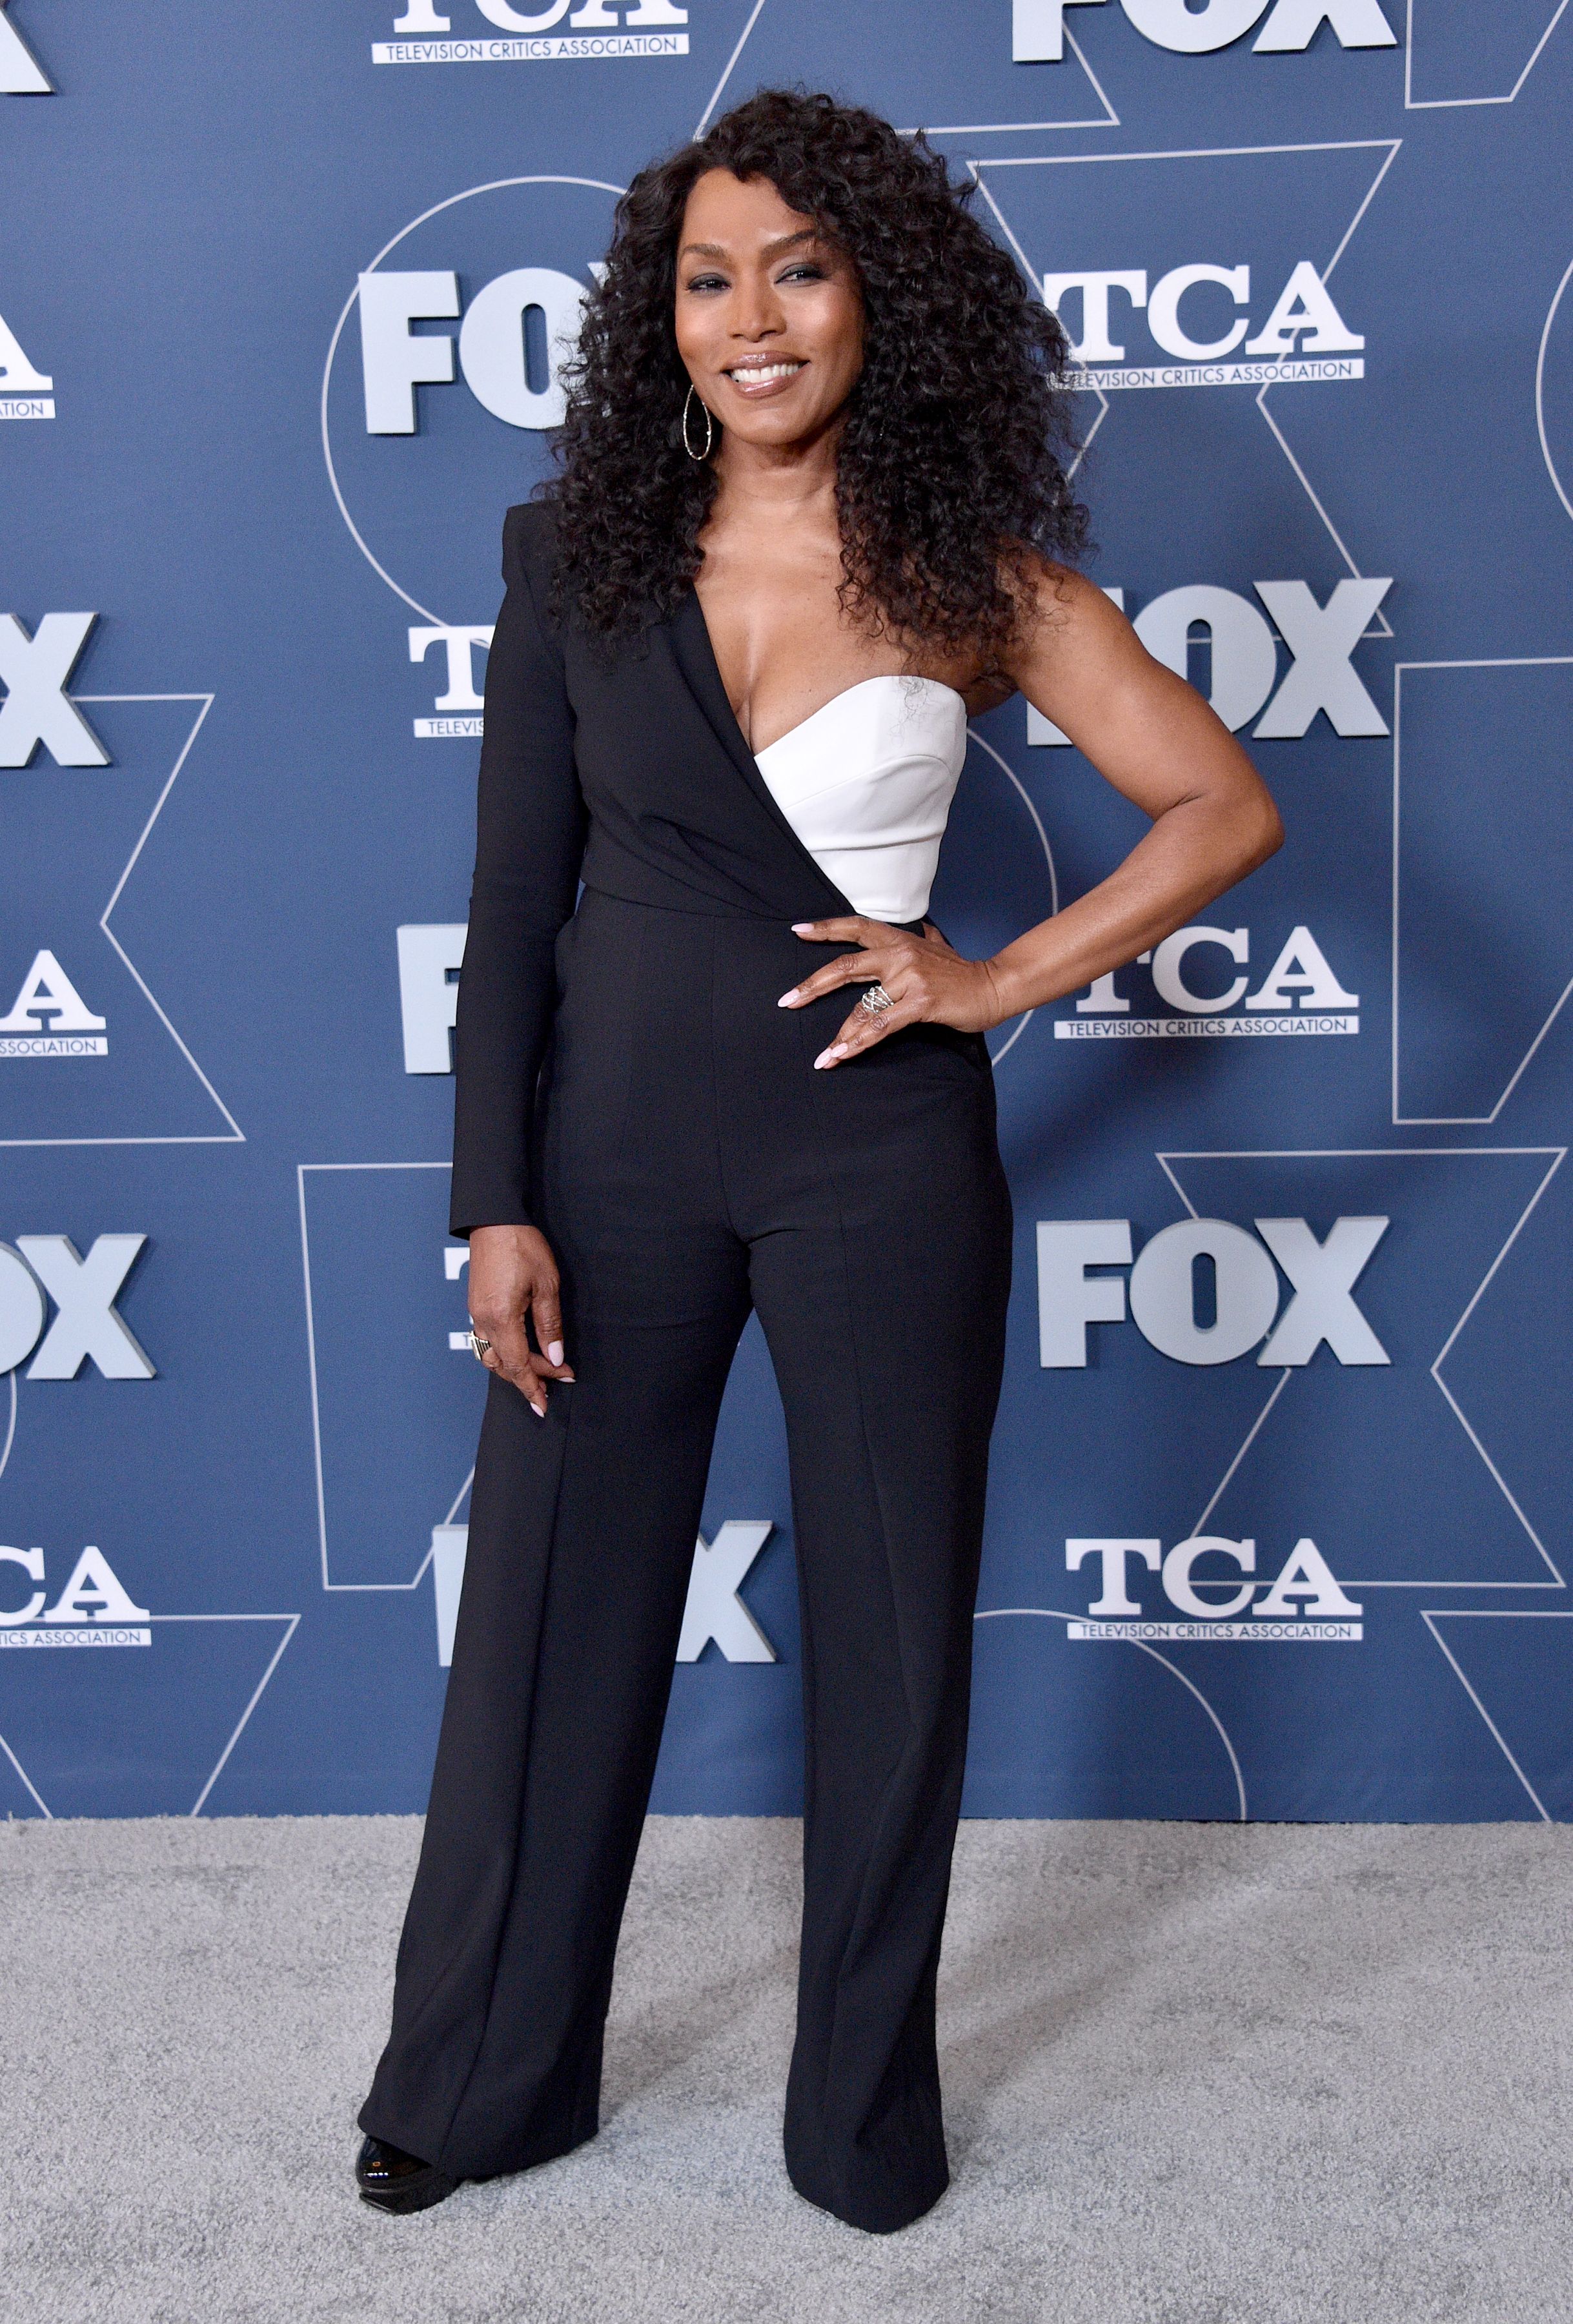 Angela Bassett attends the FOX Winter TCA All Star Party at The Langham Huntington, Pasadena on January 07, 2020. | Photo: Getty Images